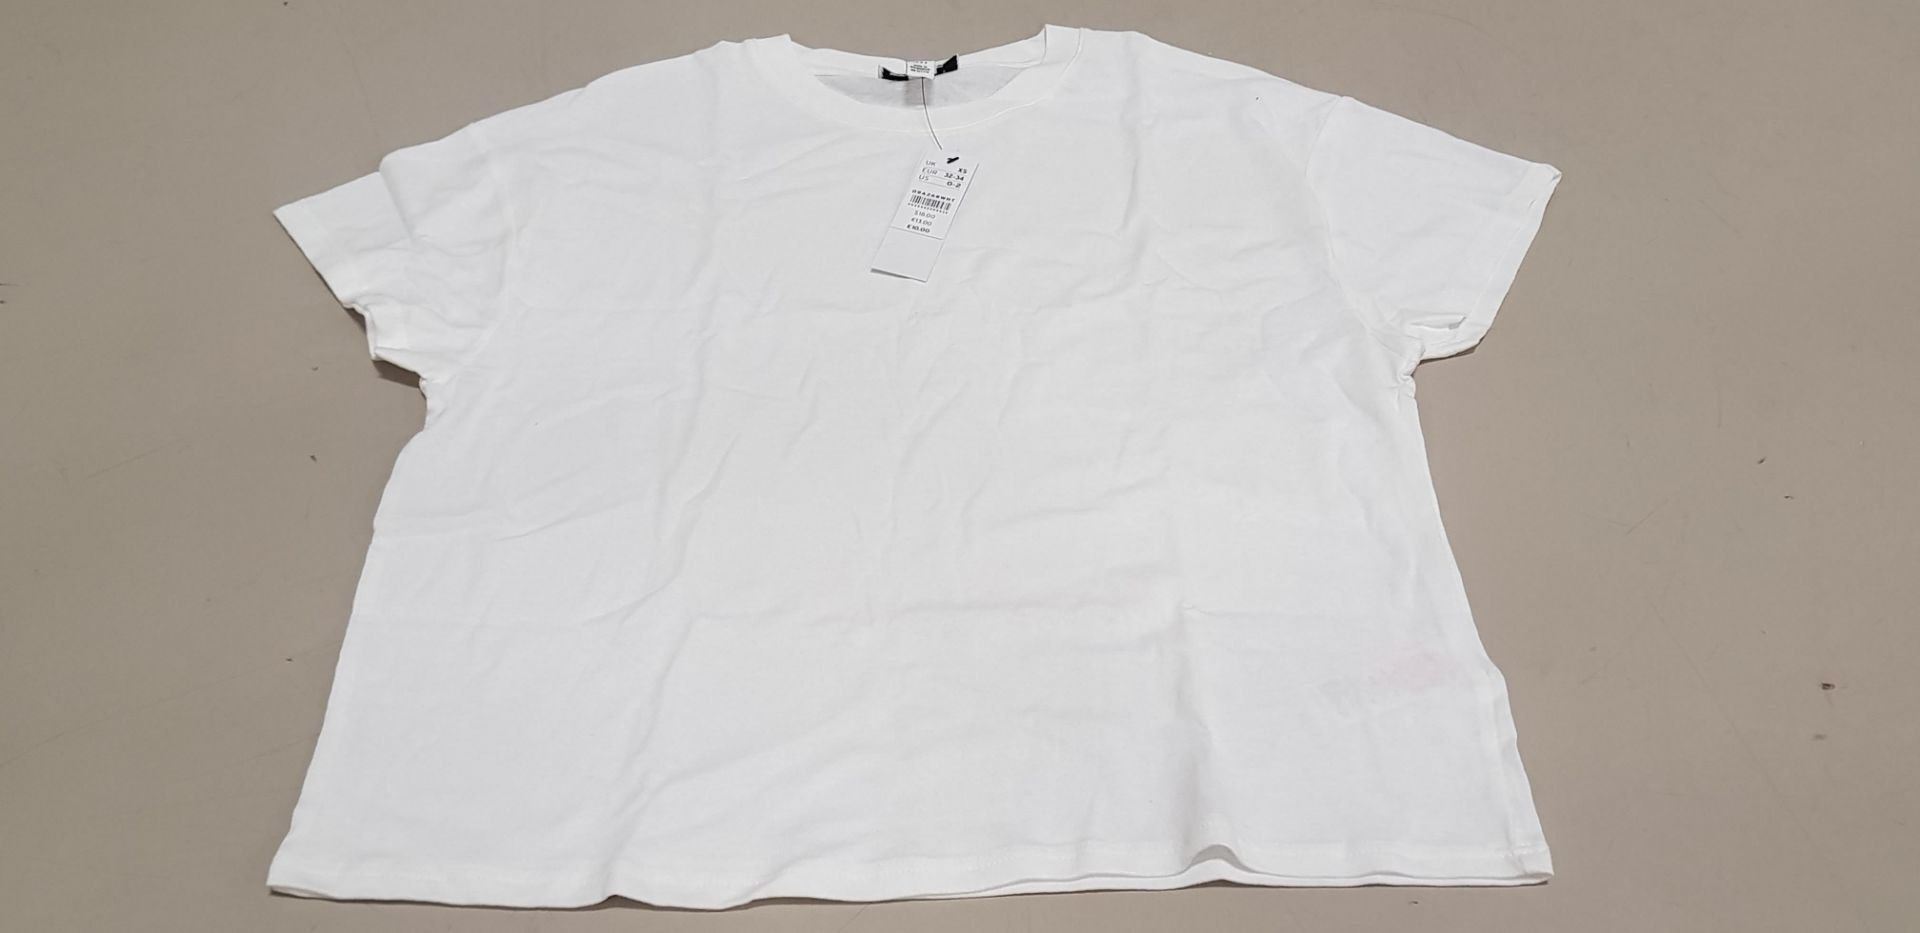 30 X BRAND NEW TOPSHOP WHITE T SHIRTS SIZE XS RRP £10.00 (TOTAL RRP £300.00)